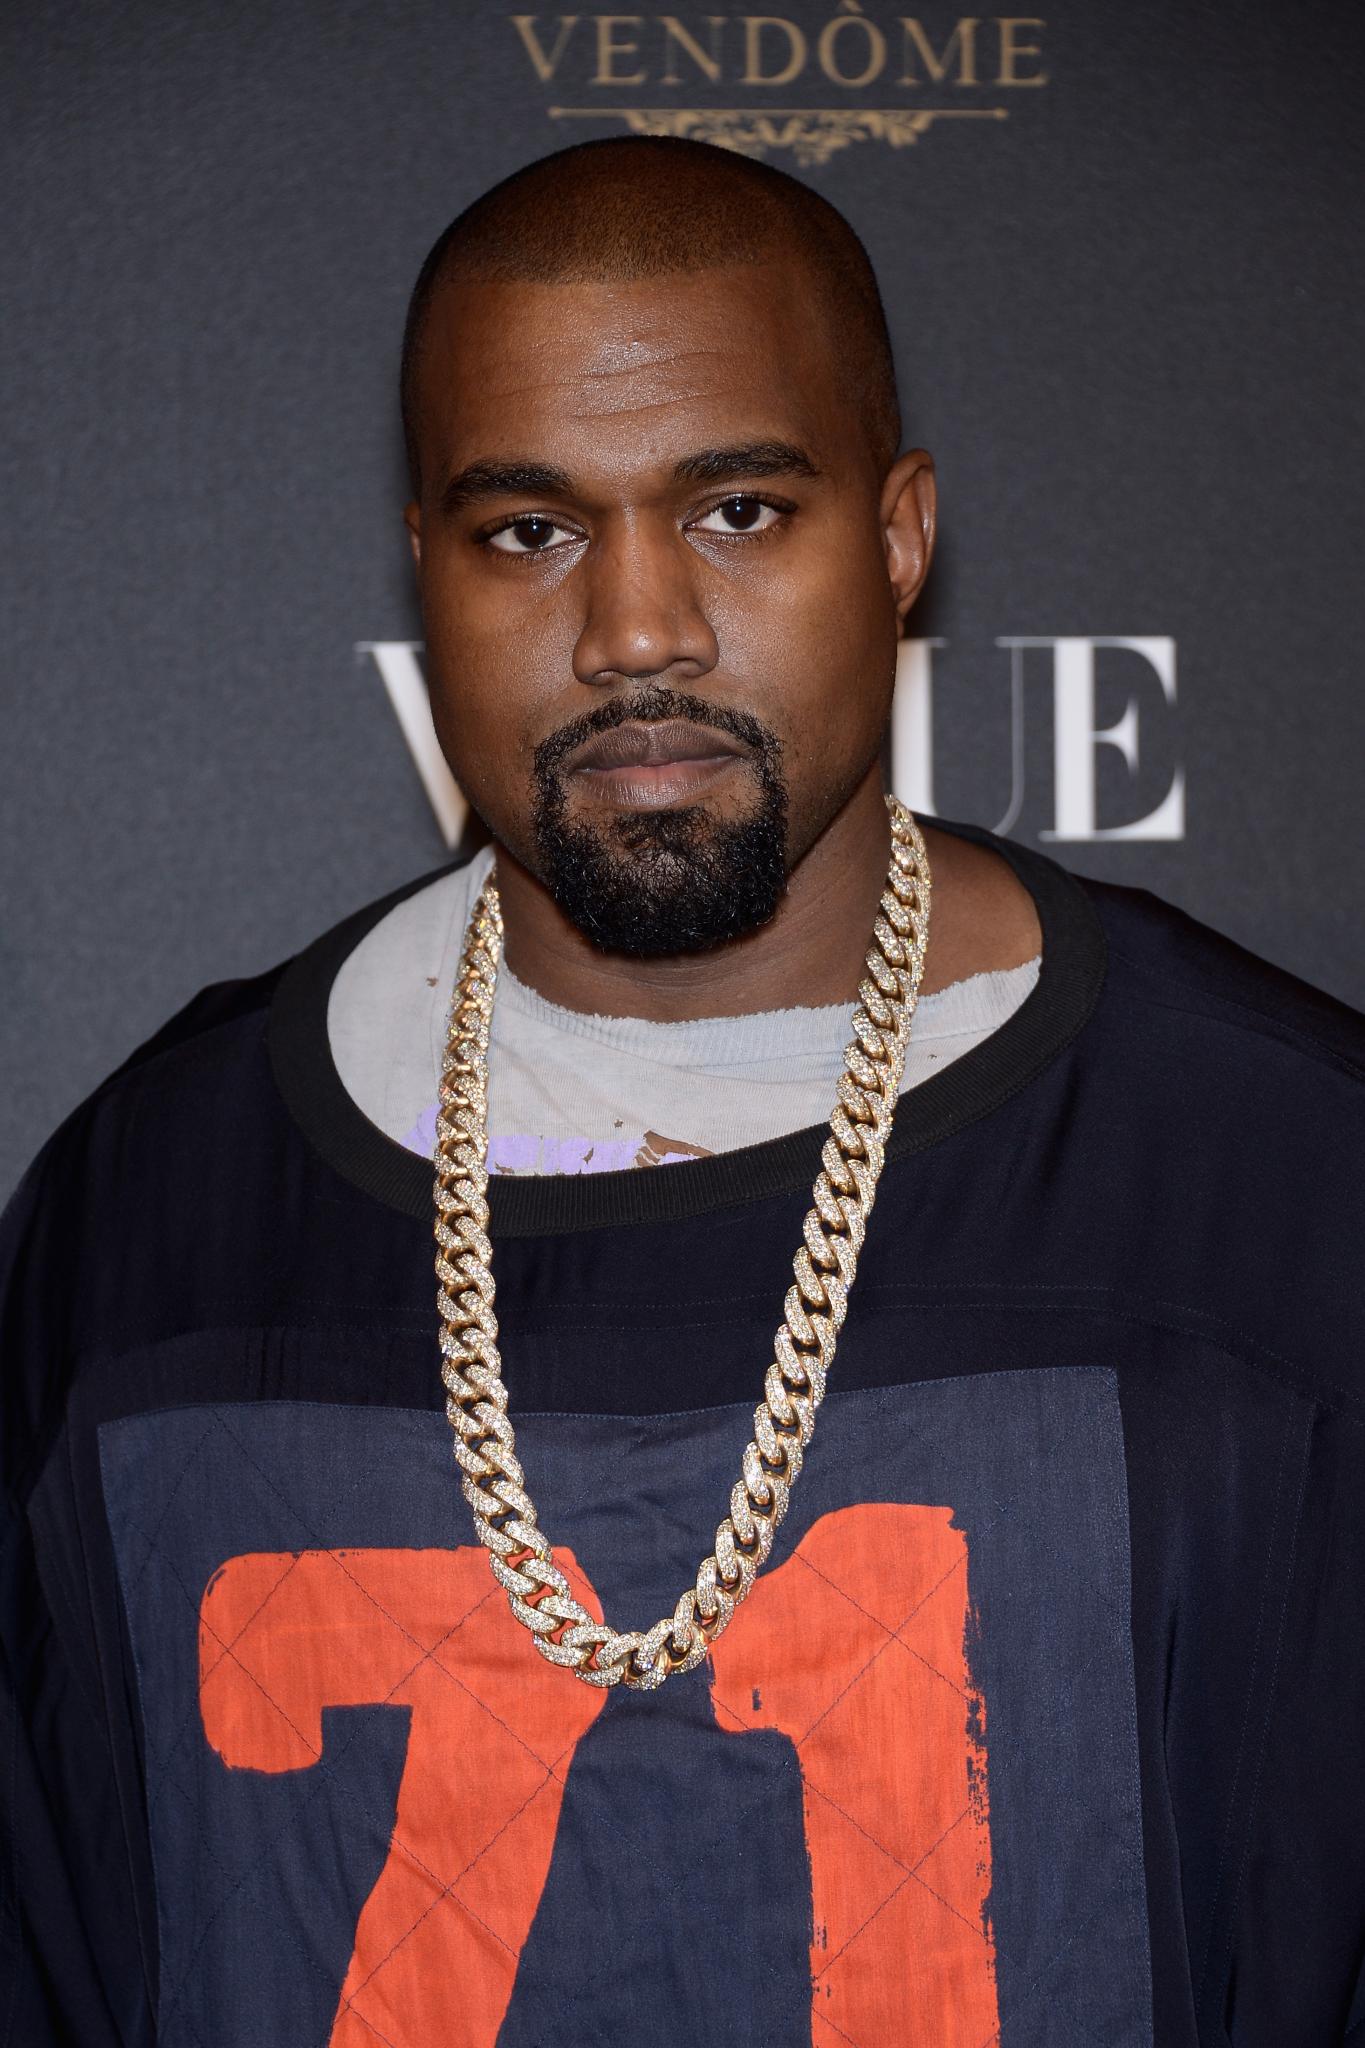 Kanye West Pays Tribute to Phife Dawg During Memorial Service
